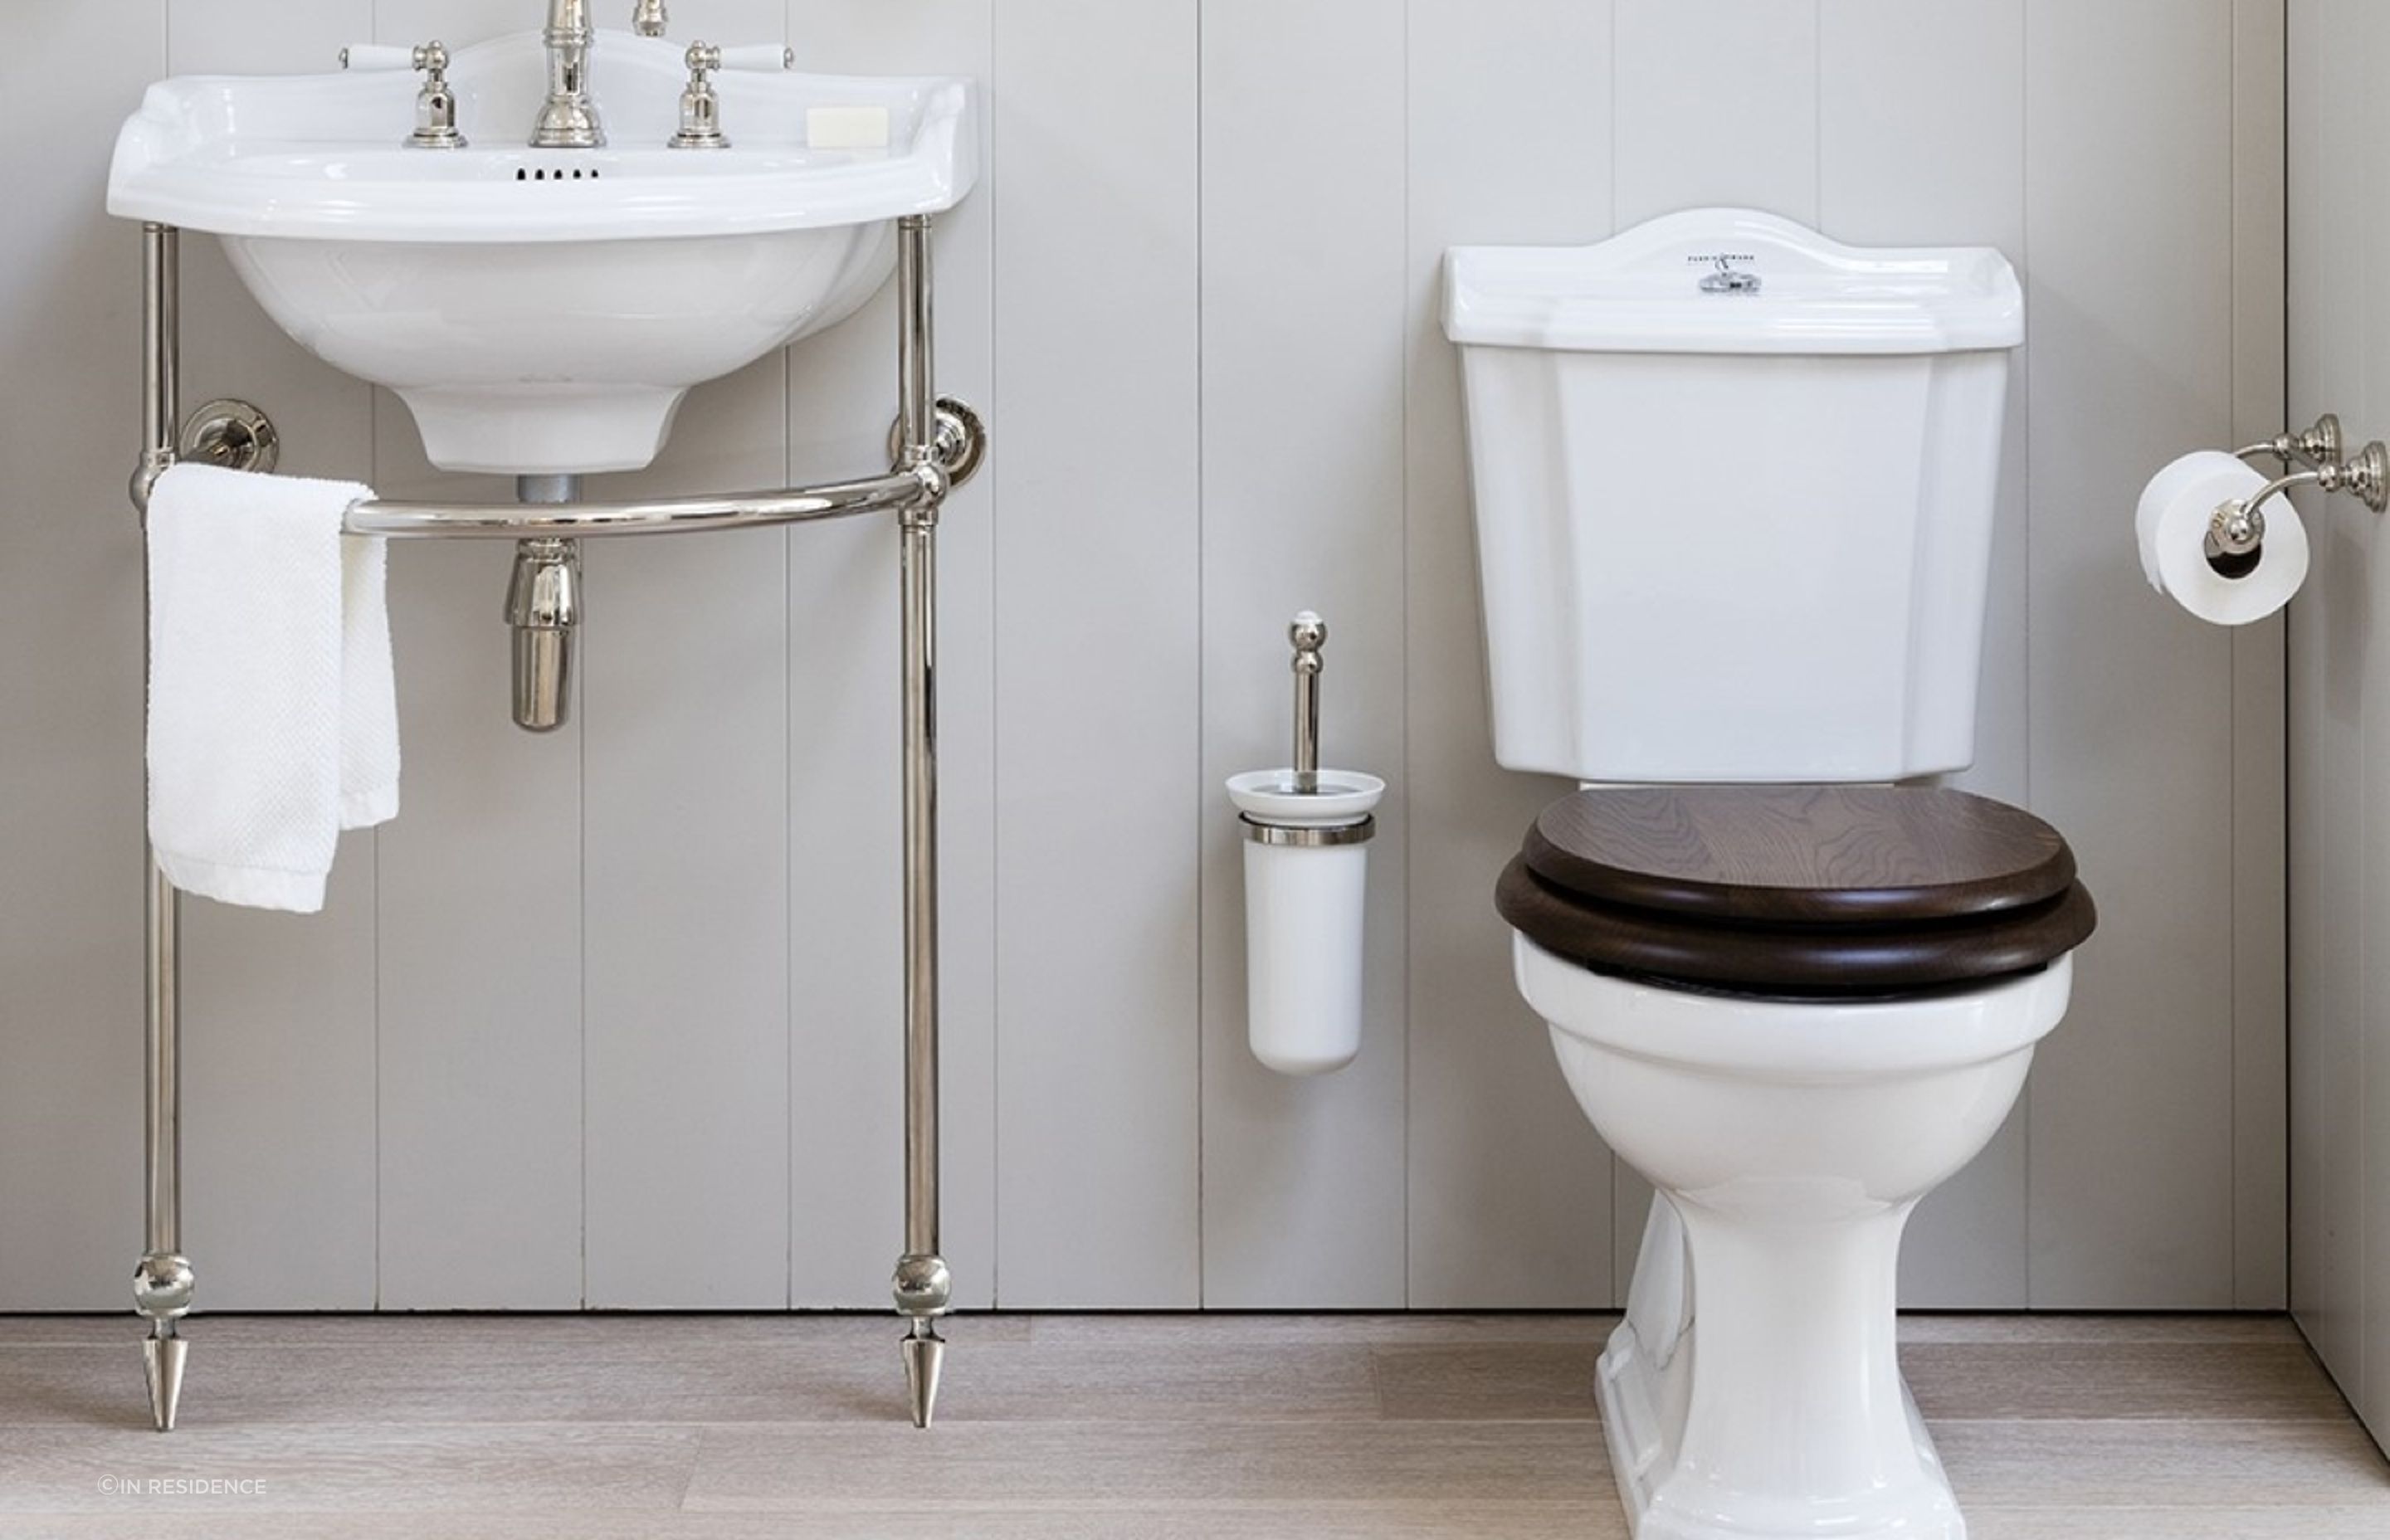 The Perrin &amp; Rowe Edwardian Toilet is as robust and charming as they come.